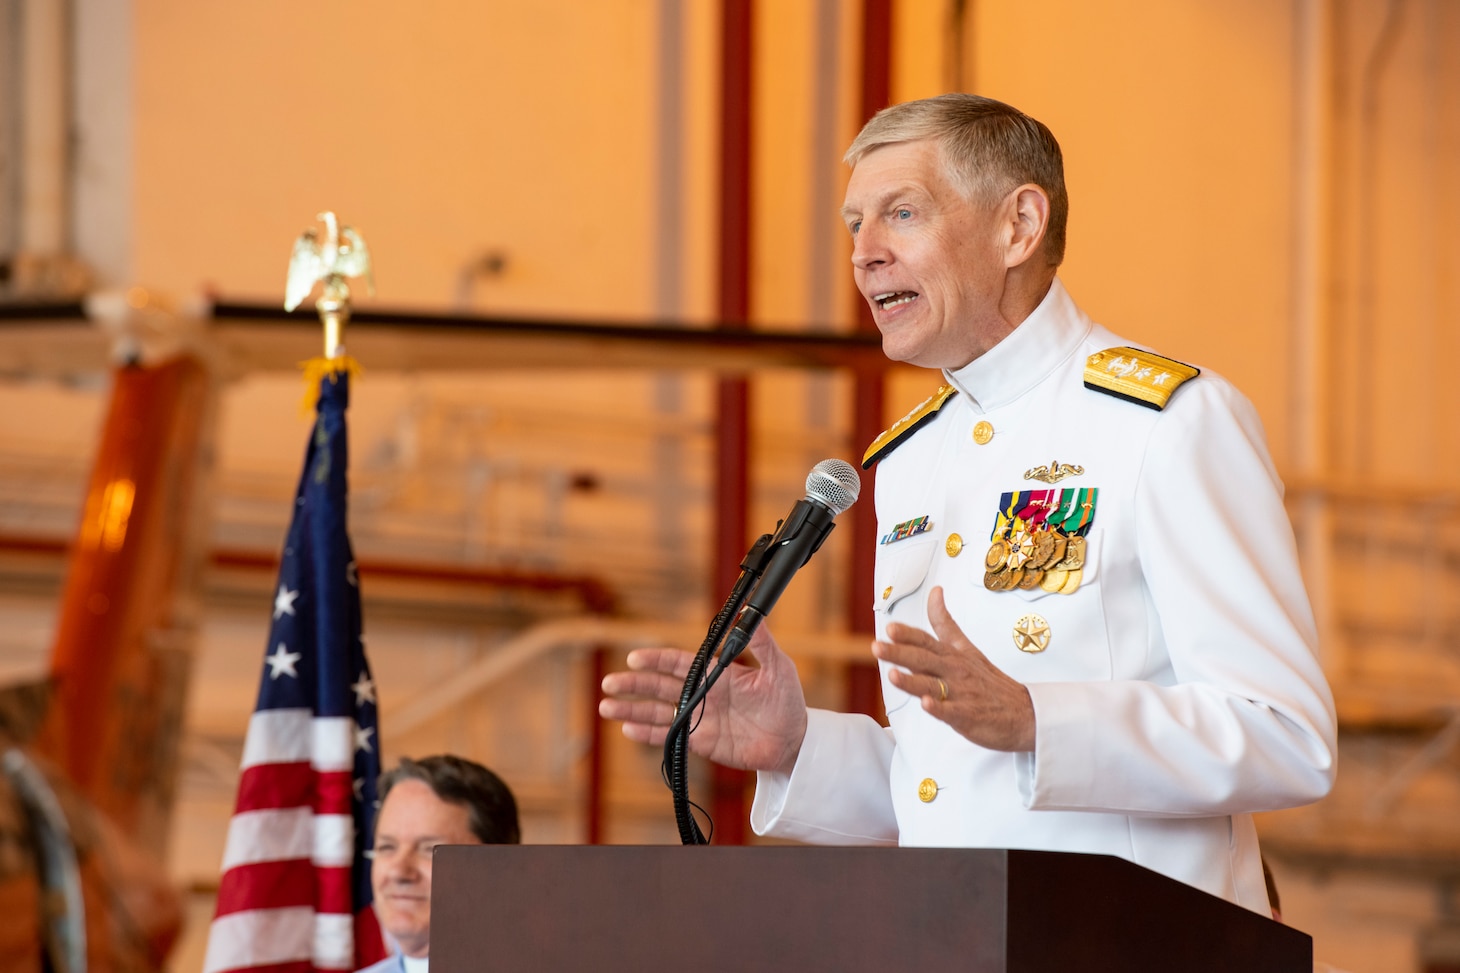 Chief of Naval Research Rear Adm. Lorin Selby presides over the U.S. Naval Research Laboratory’s Scientific Development Squadron (VXS) 1 during a change of command ceremony at Naval Air Station Patuxent River in Patuxent River, Maryland, May 18, 2023. (U.S. Navy photo by Sarah Peterson)